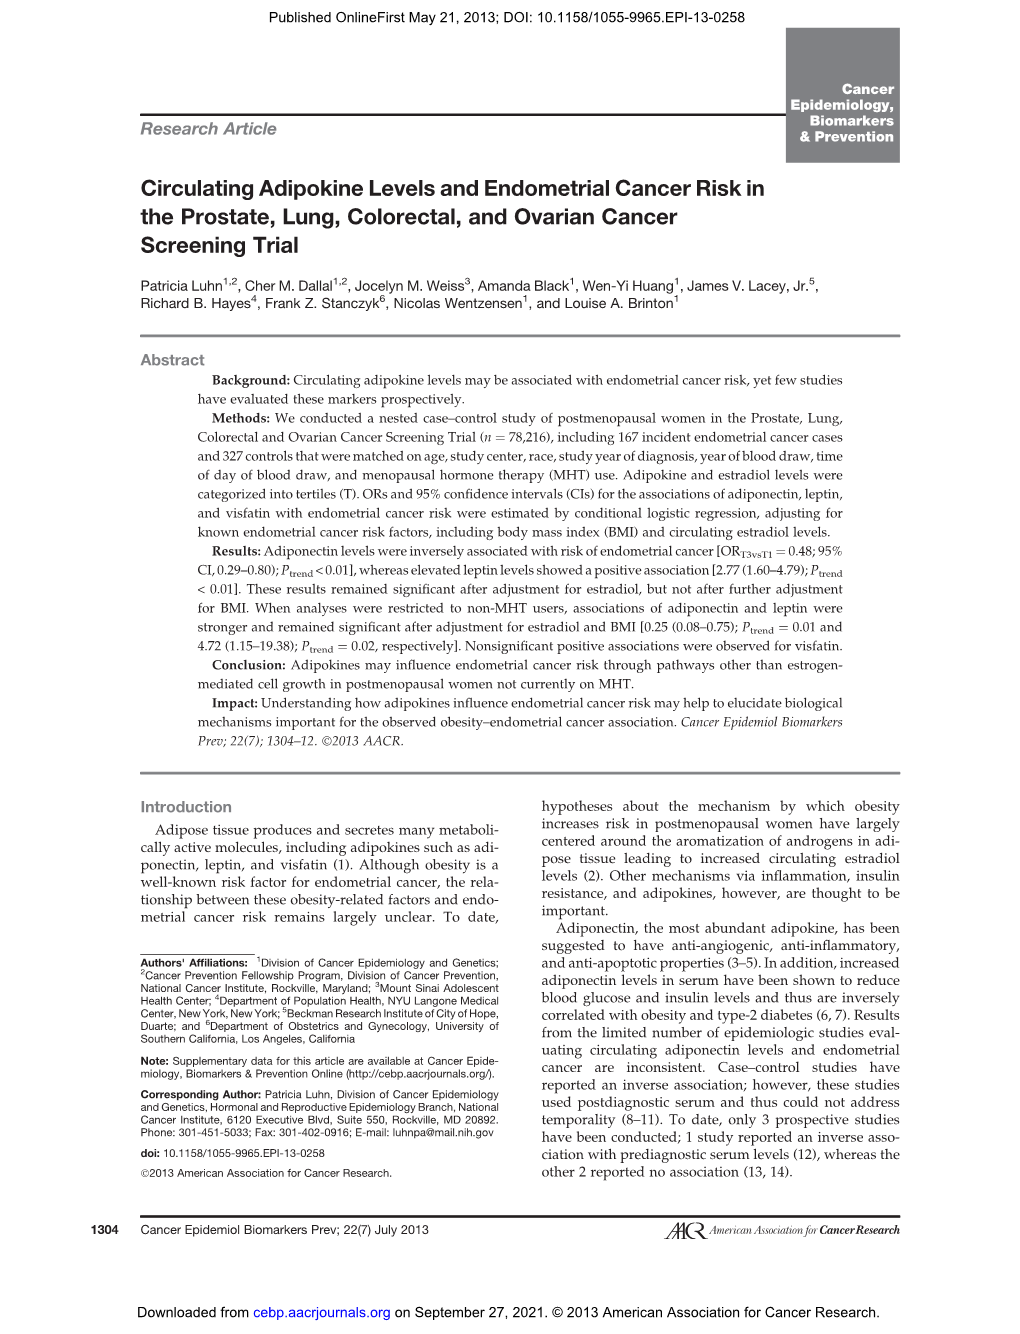 Circulating Adipokine Levels and Endometrial Cancer Risk in the Prostate, Lung, Colorectal, and Ovarian Cancer Screening Trial